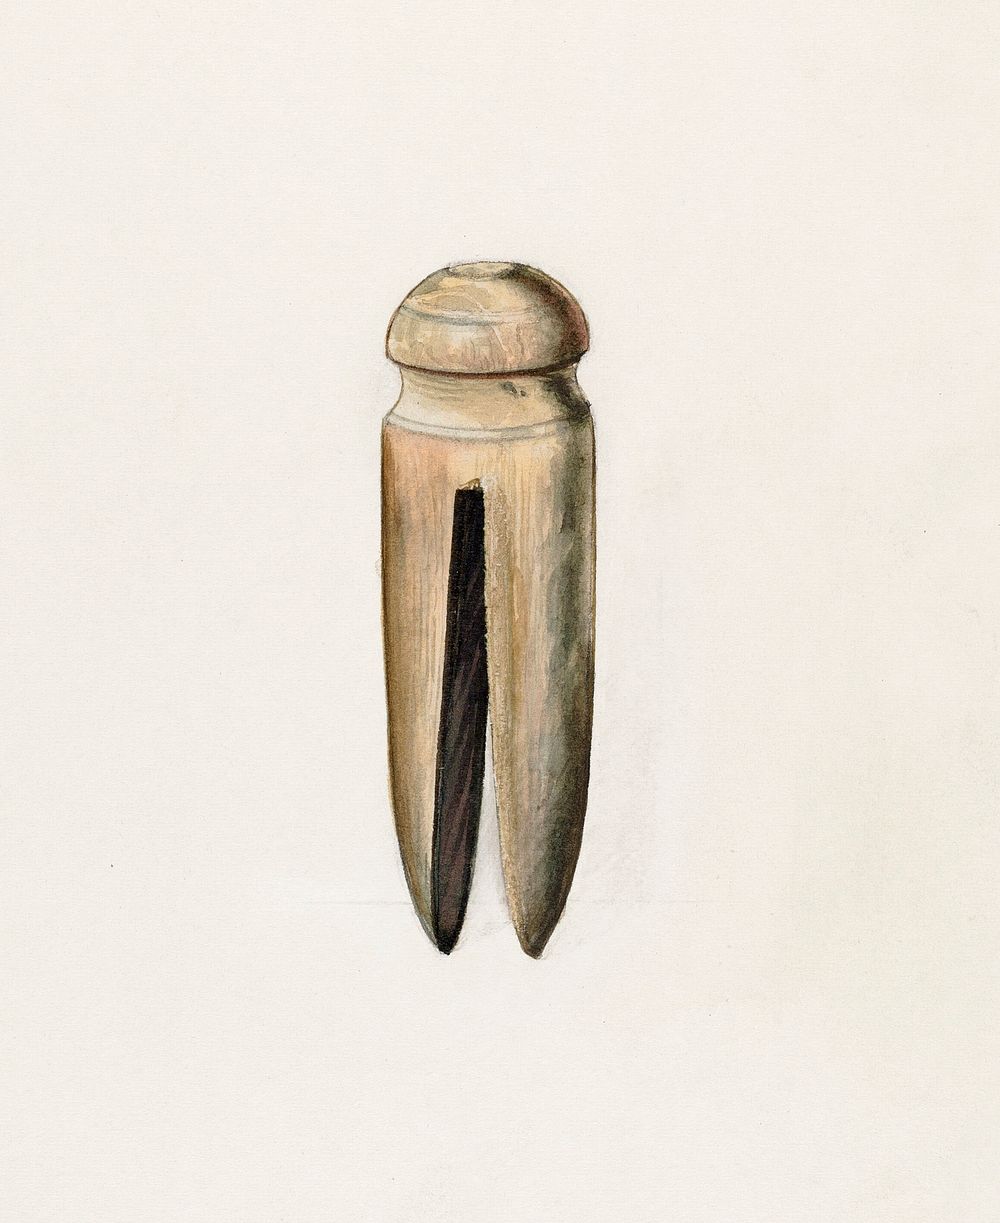 Clothes Pin (ca.1938) by Ralph Atkinson. Original from The National Gallery of Art. Digitally enhanced by rawpixel.